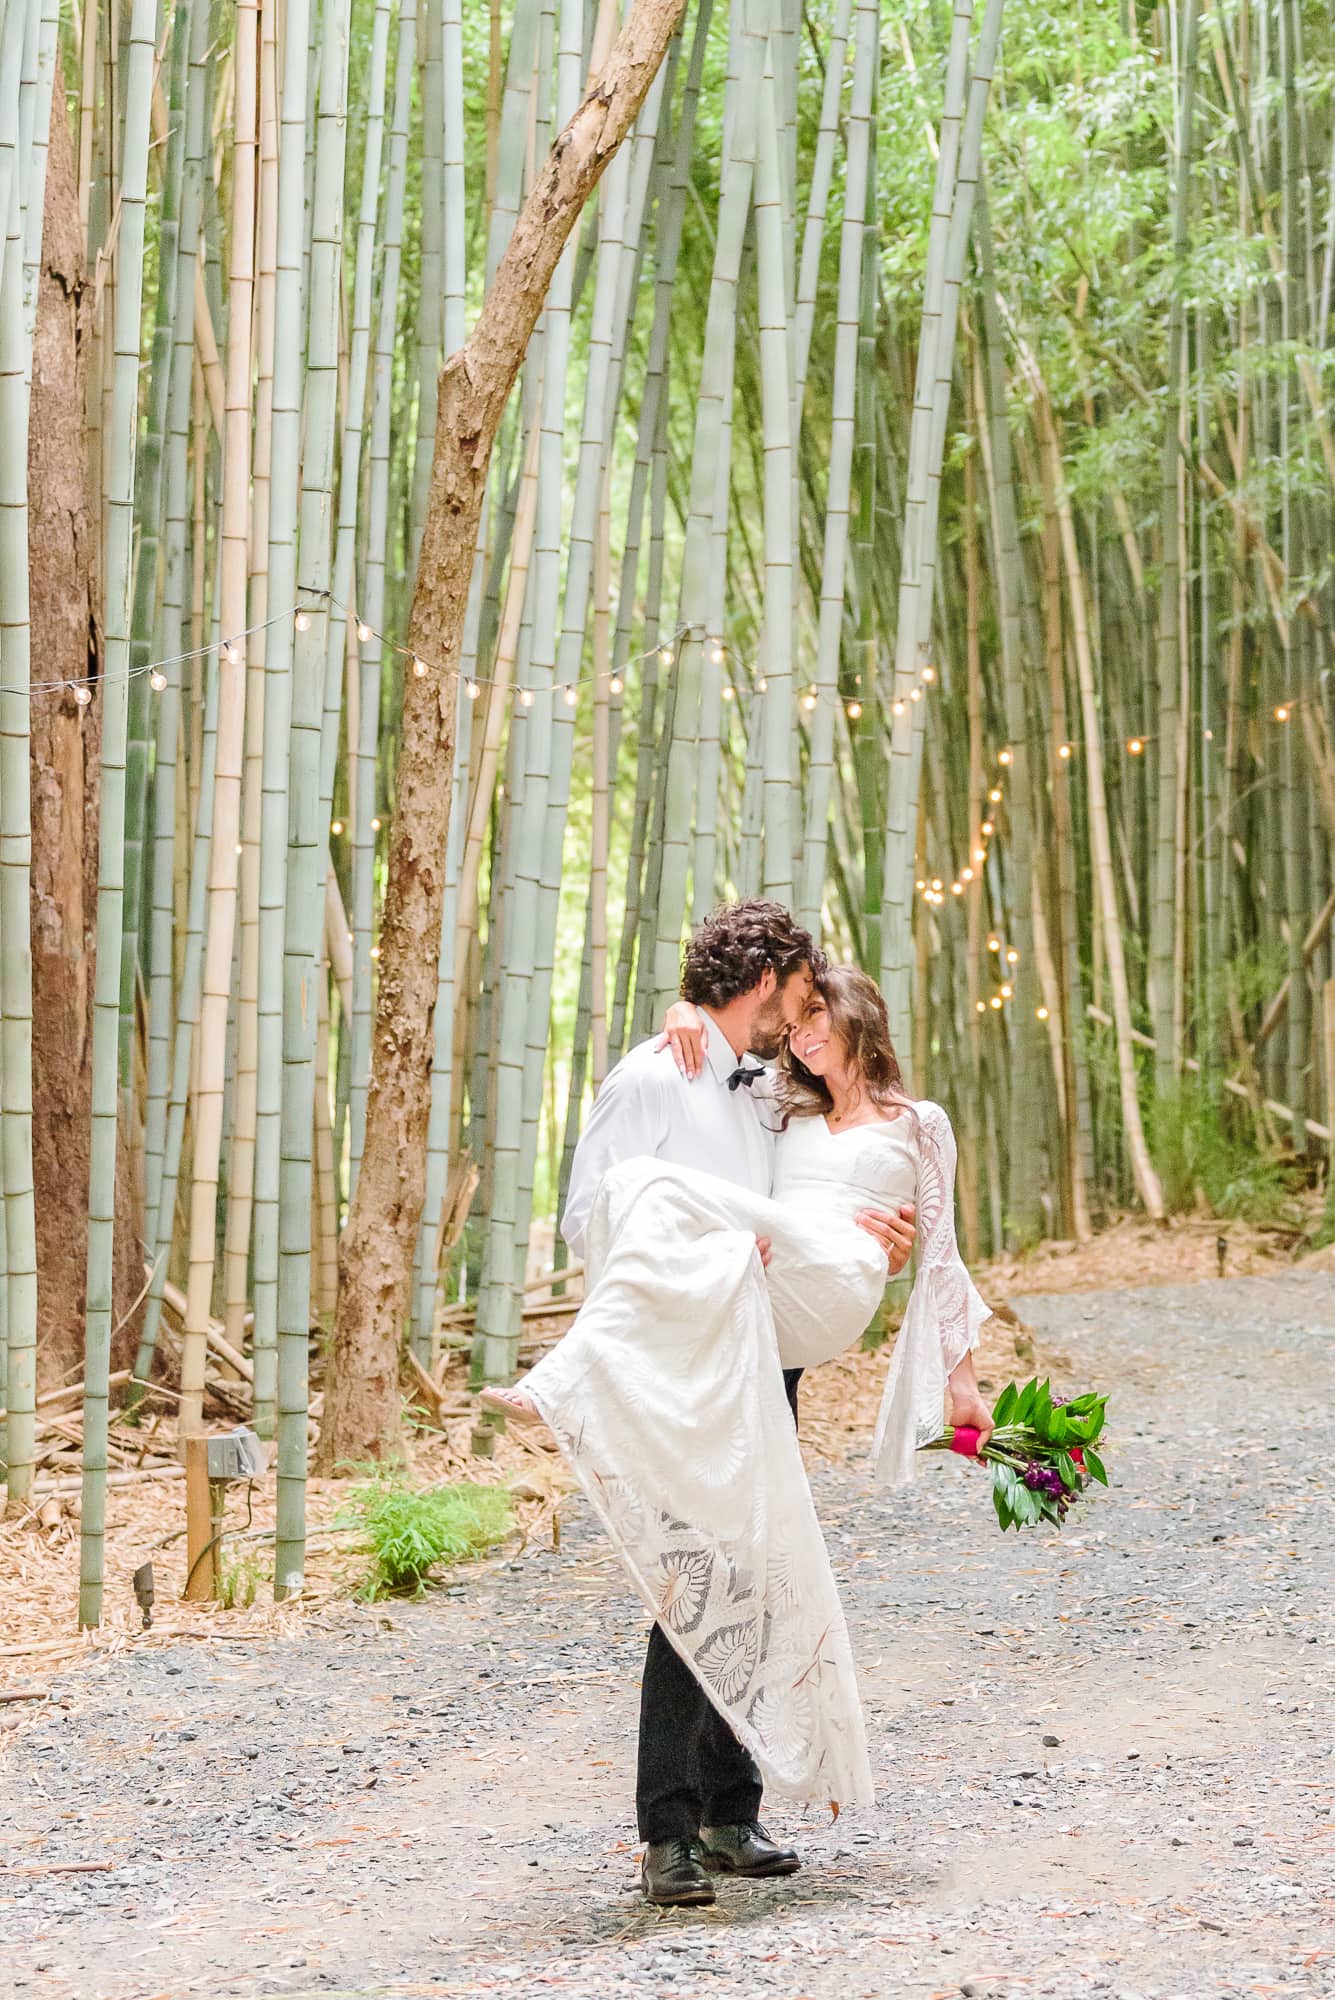 Trevor picks Kaelyn up and carries her through their wedding venue's bamboo forest in Belmont, NC.